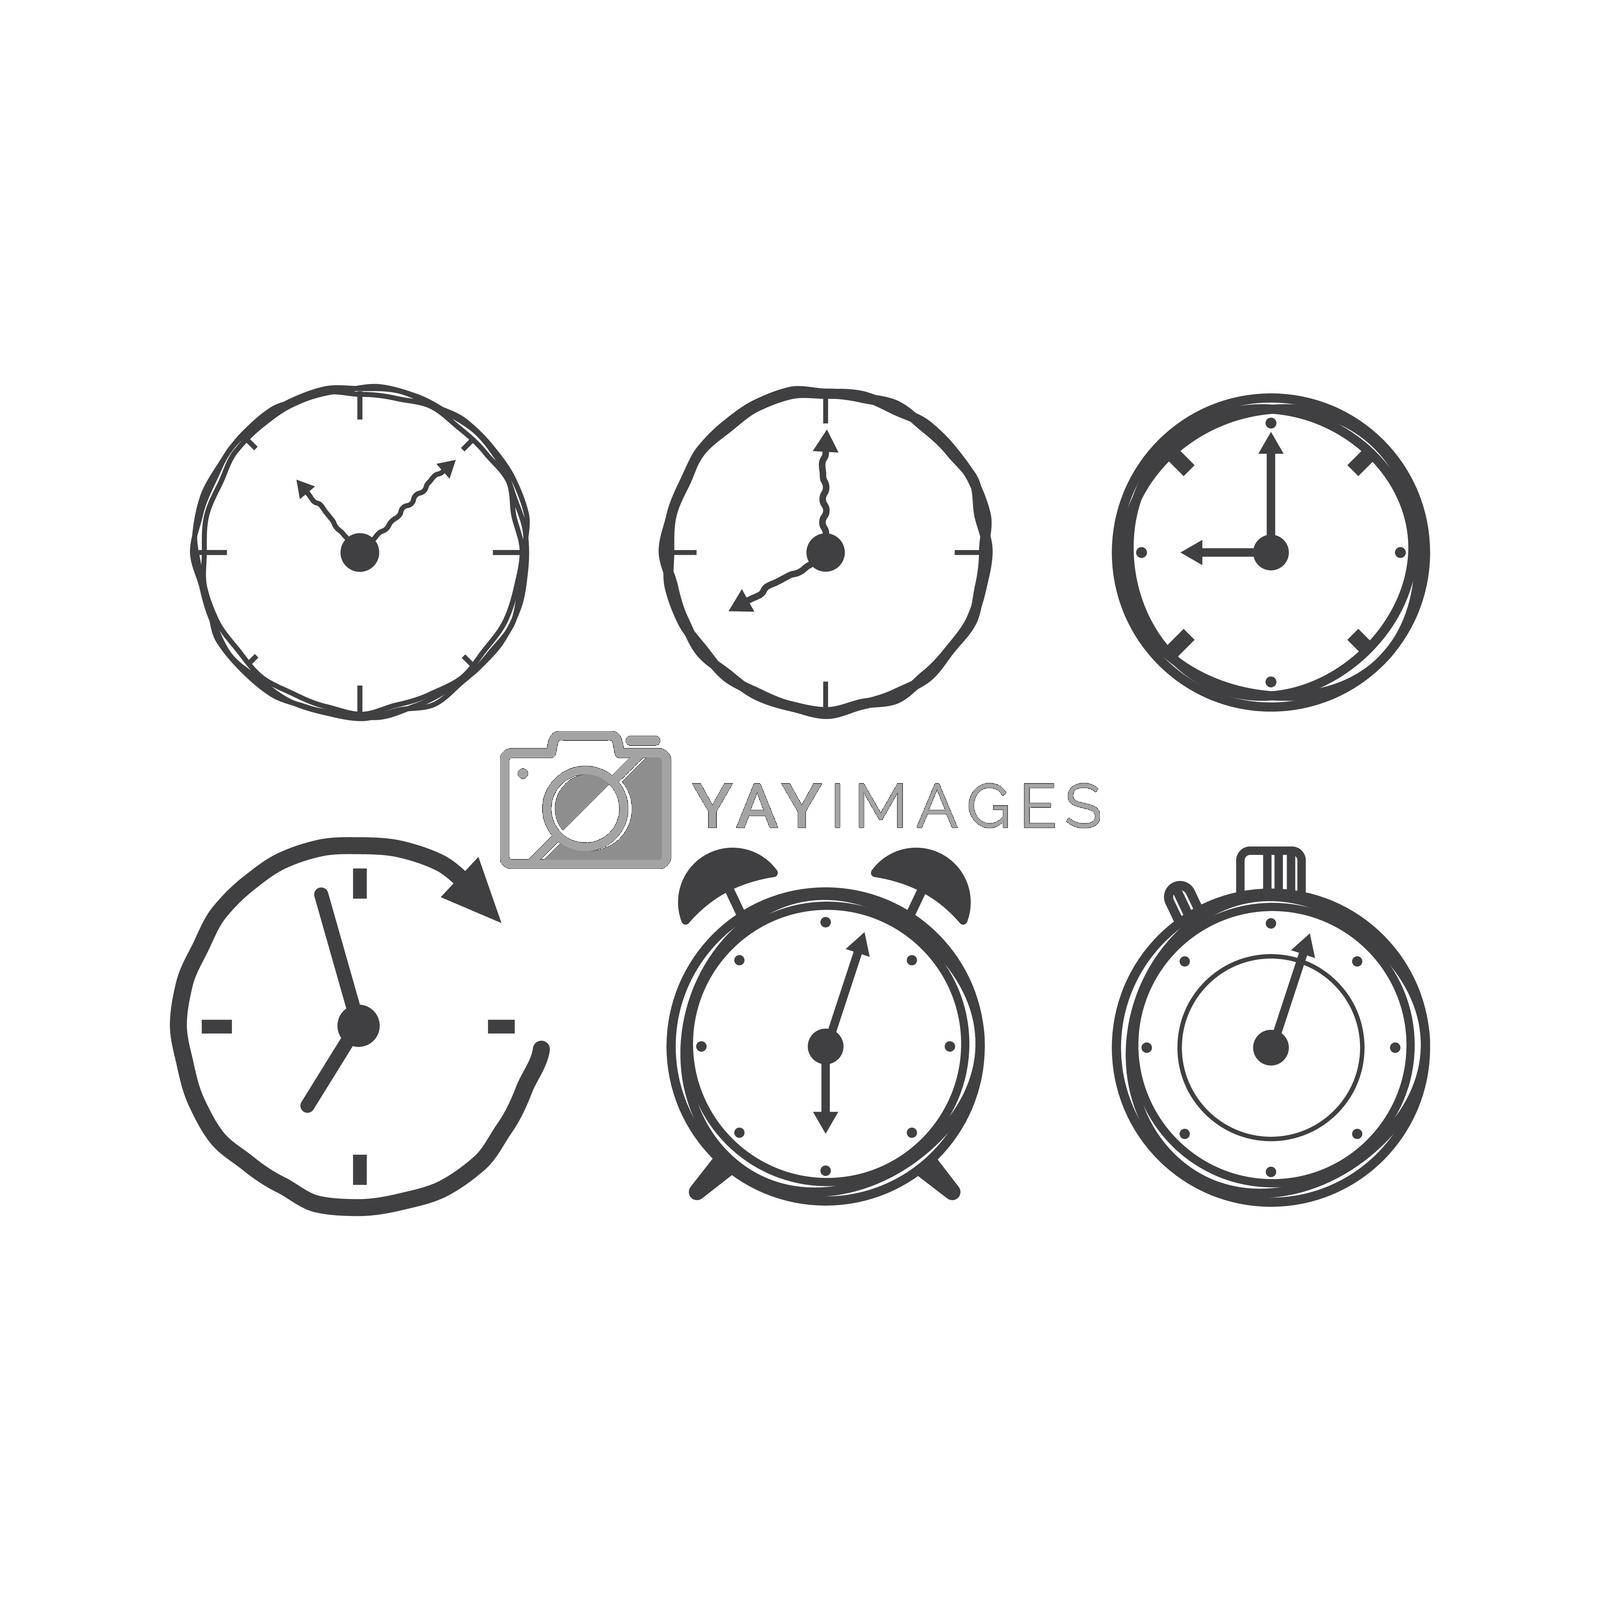 Royalty free image of O Clock icon by awk